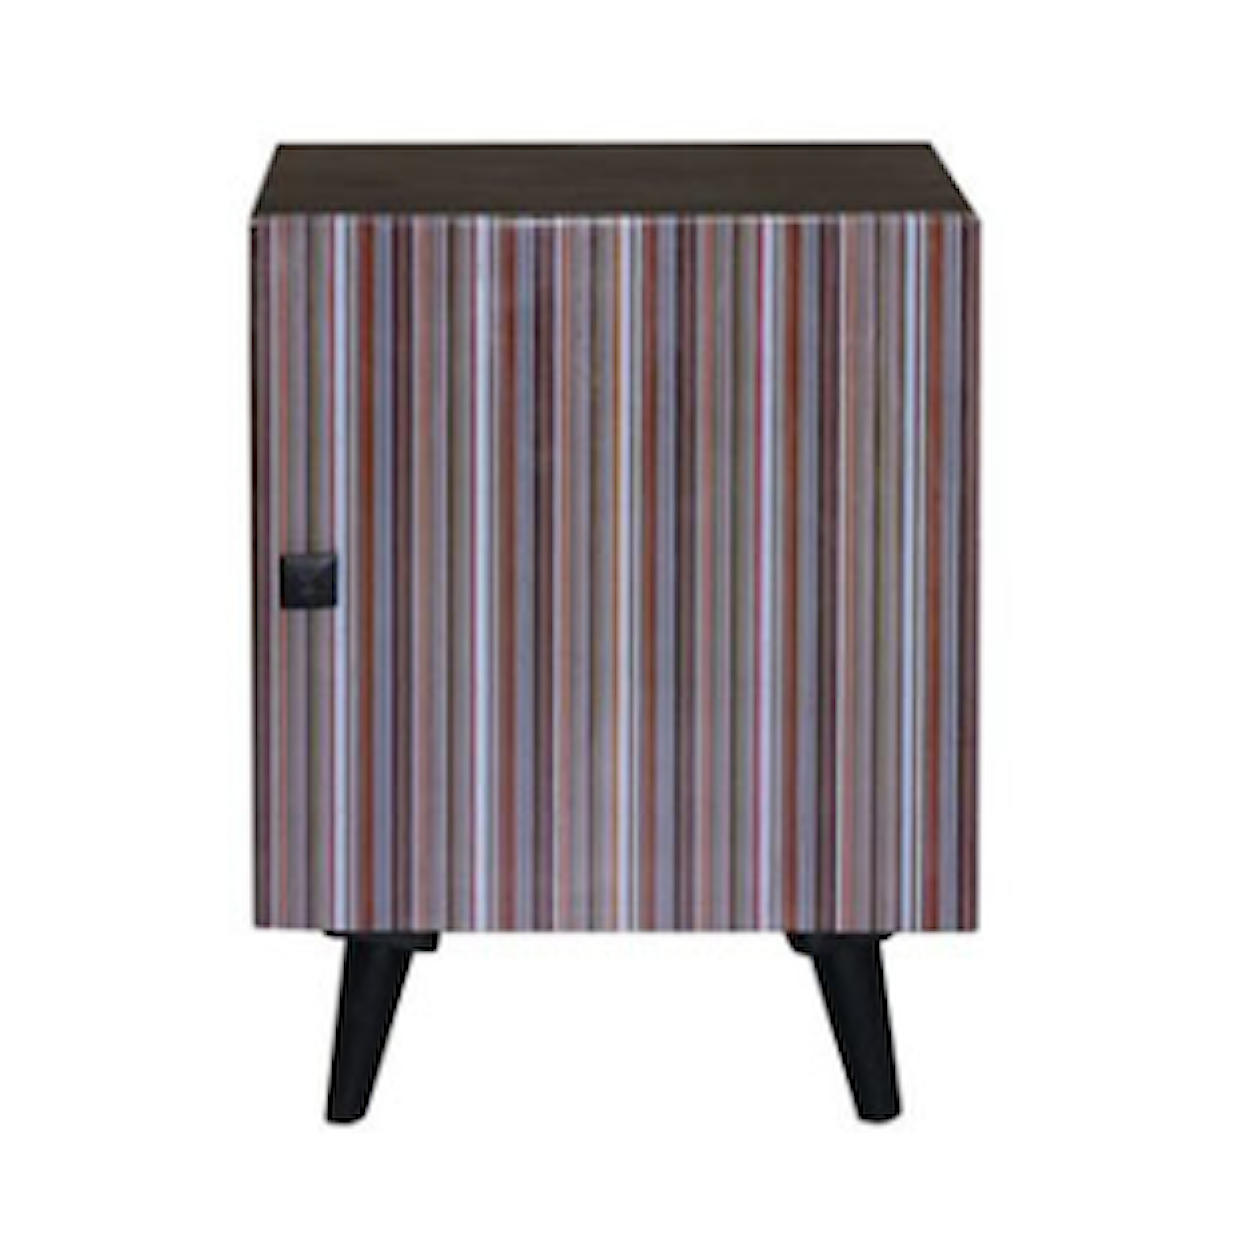 Carolina Chairs Outbound Nightstand